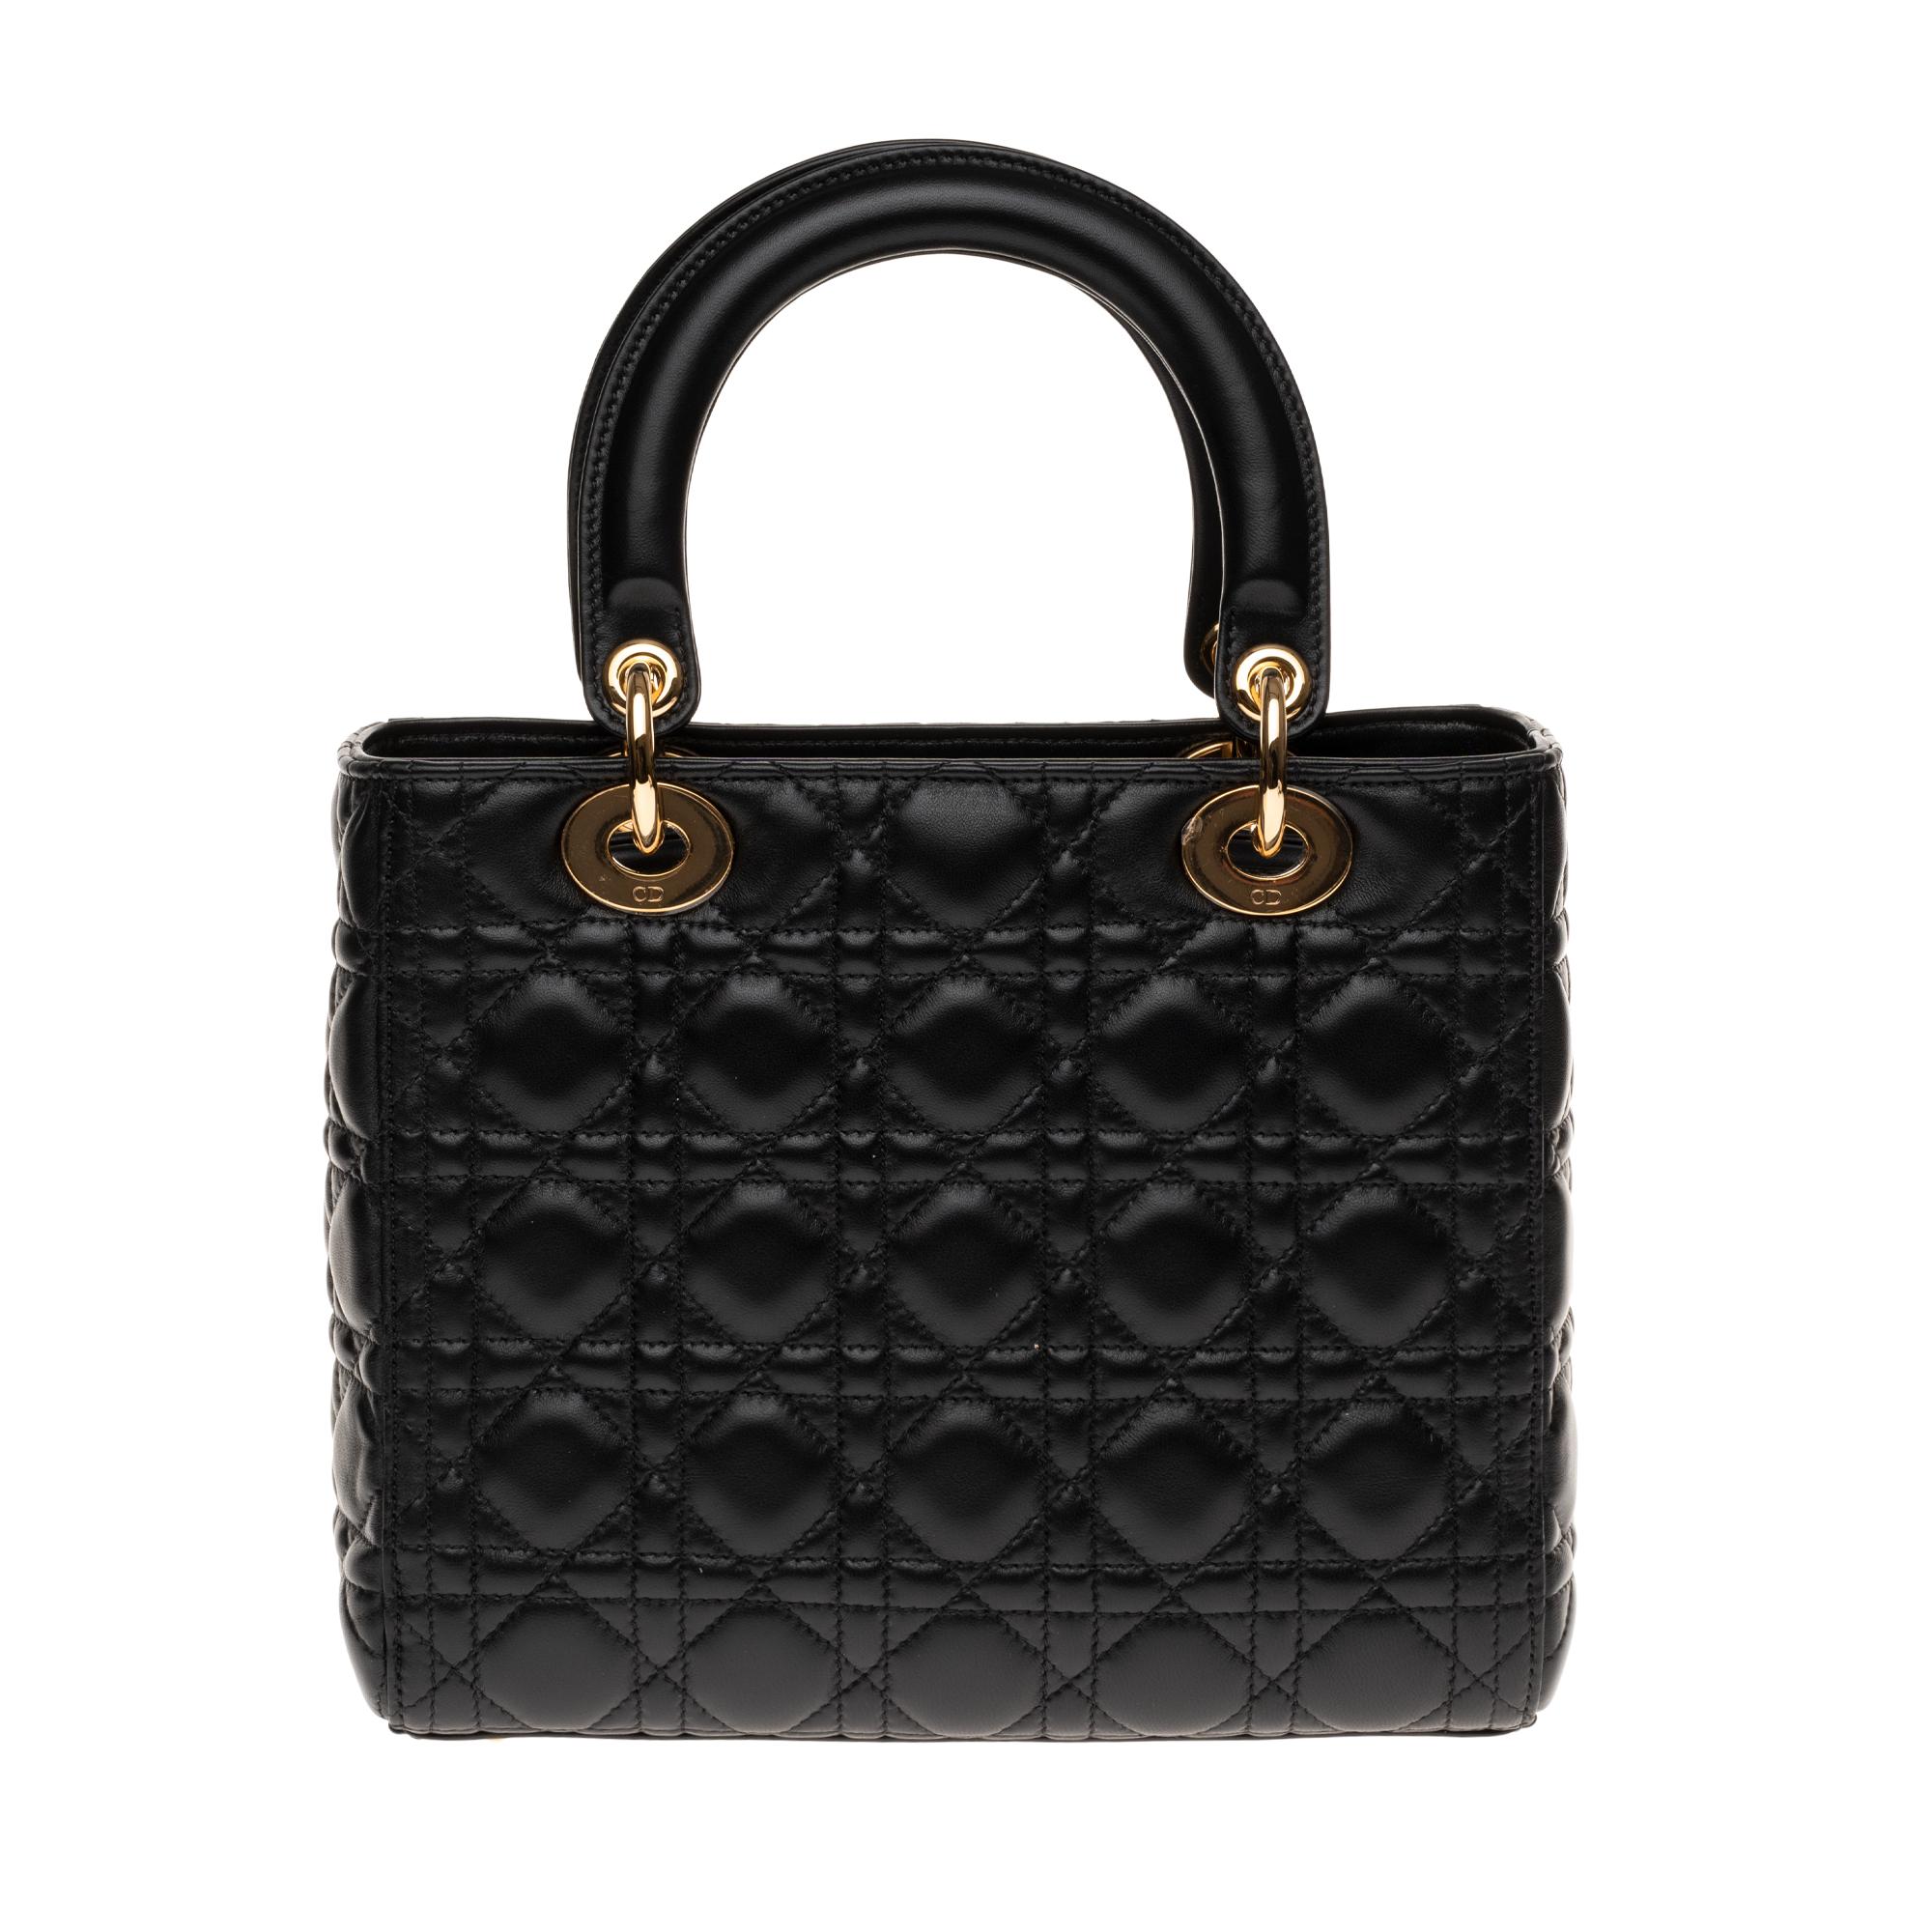 The classy and iconic shoulder bag Dior Lady Dior medium model in black cannage leather, gold metal hardware, double handle in black leather, removable shoulder strap handle in black leather allowing a handheld or shoulder or shoulder strap.

A